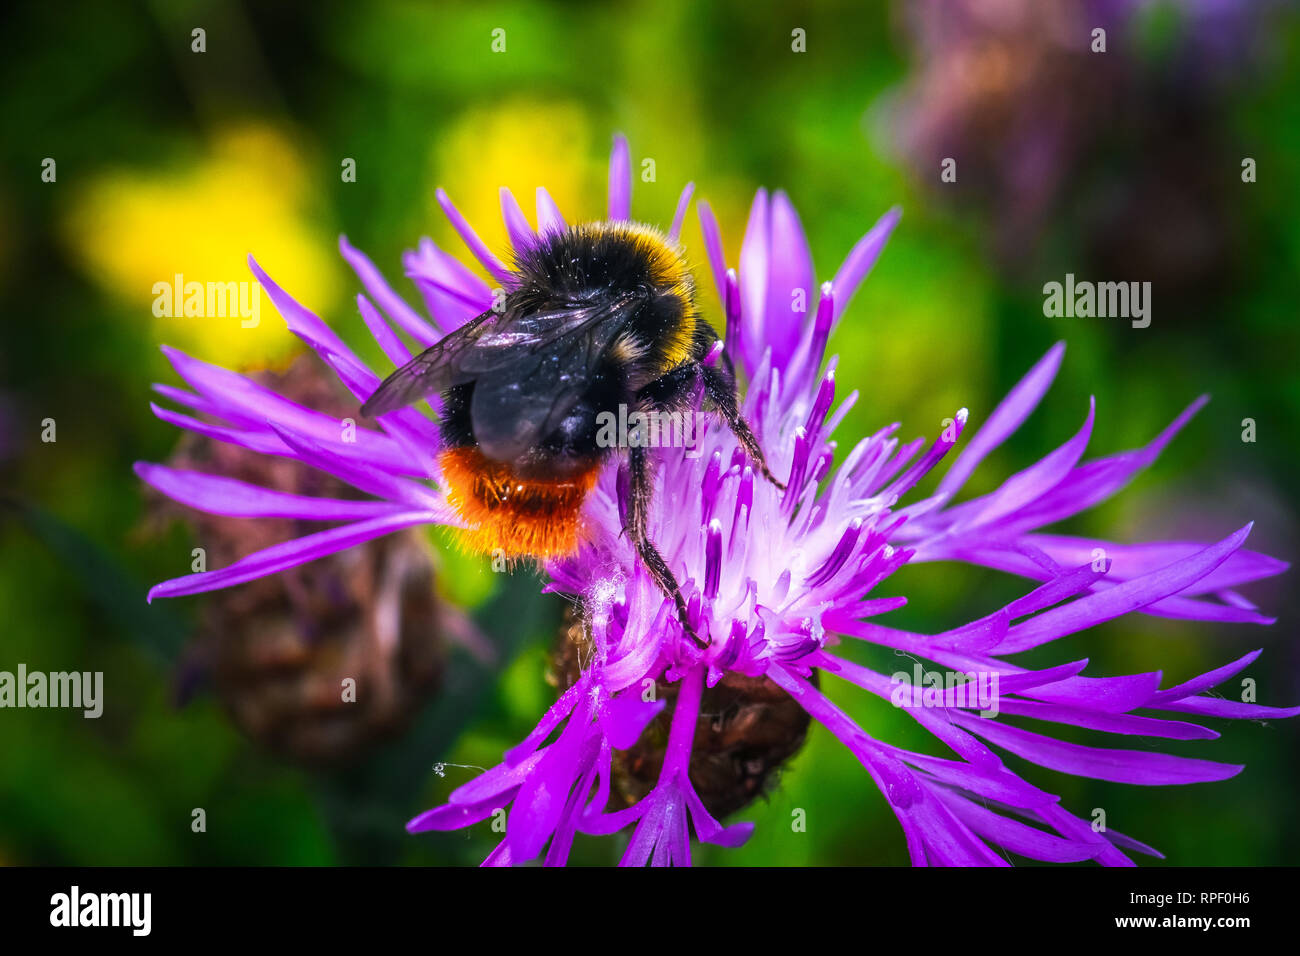 Close up honey Bee Insect Pollinating Clover Flower Stock Photo